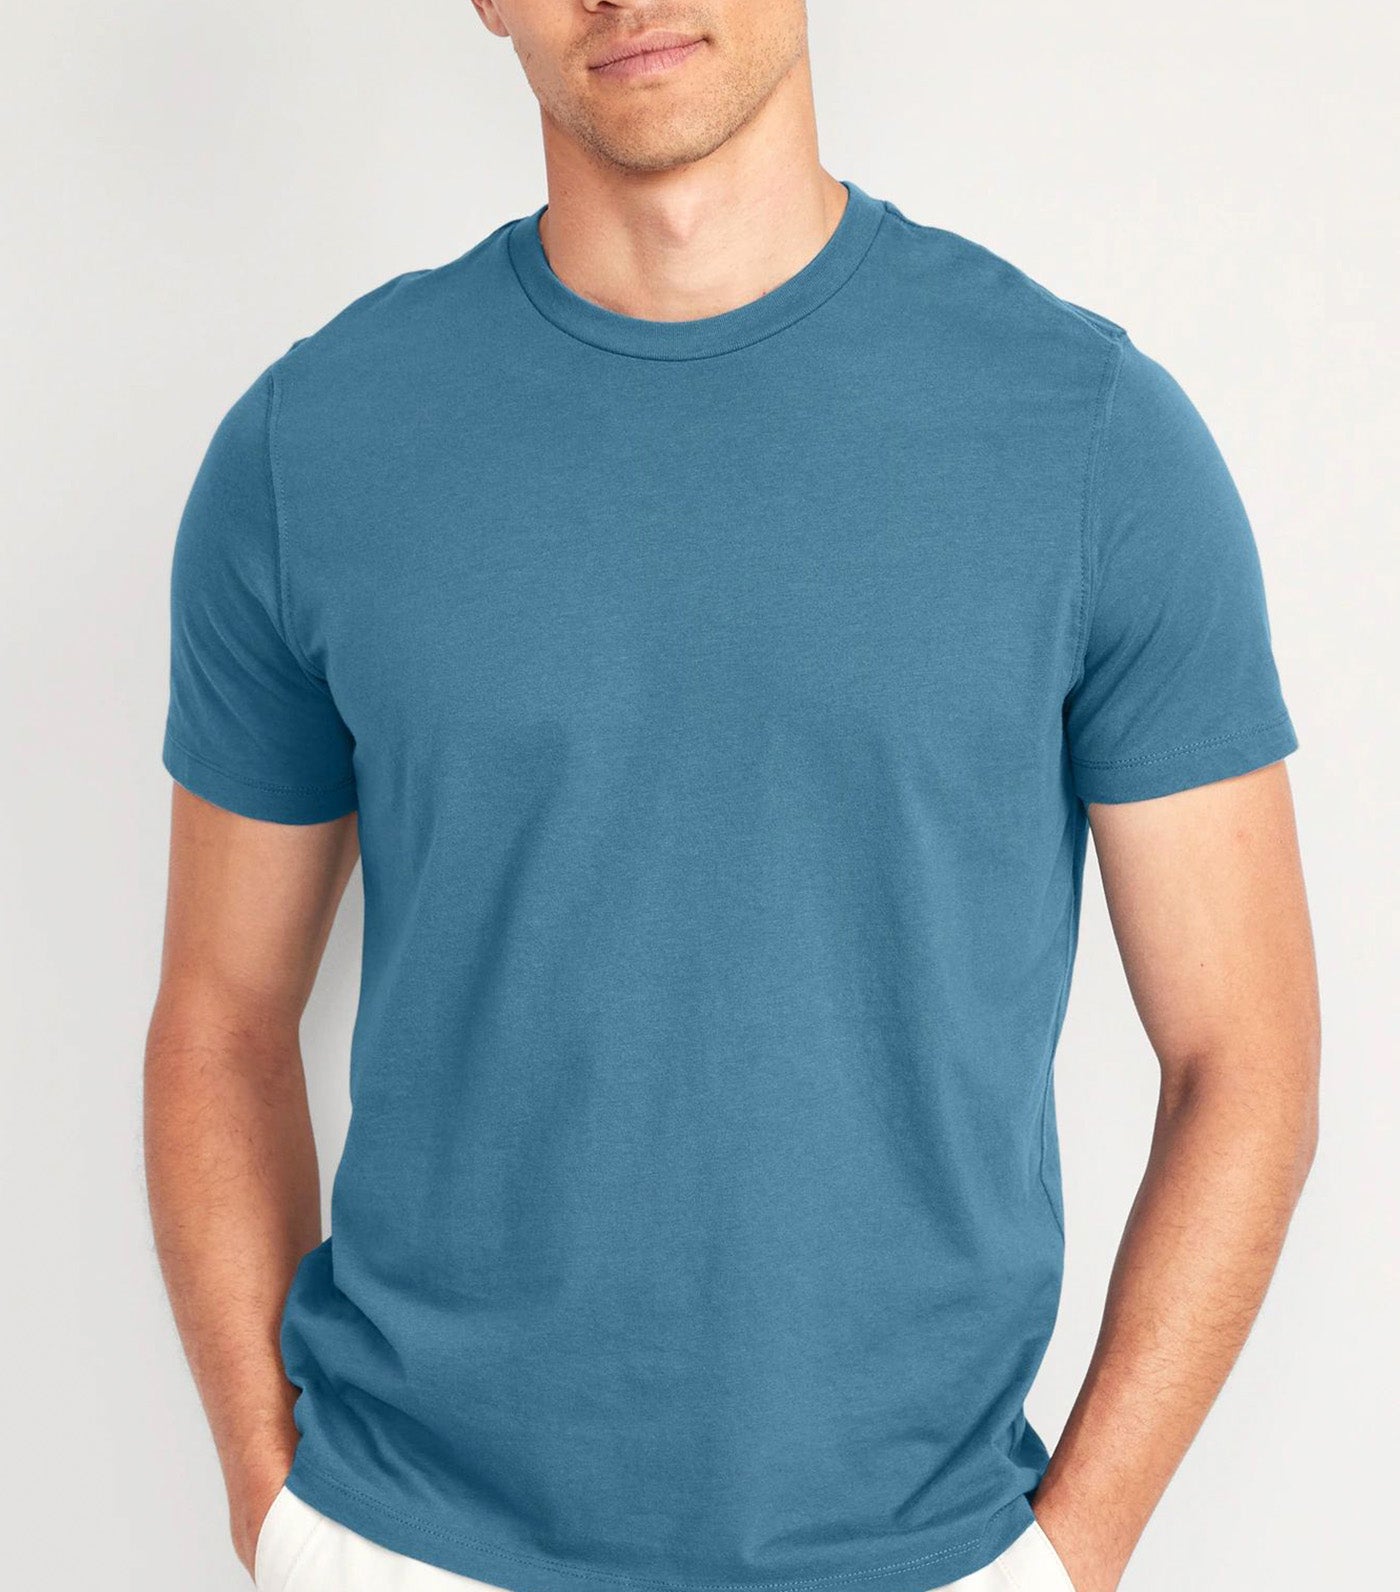 Soft-Washed Crew-Neck T-Shirt for Men Why So Blue